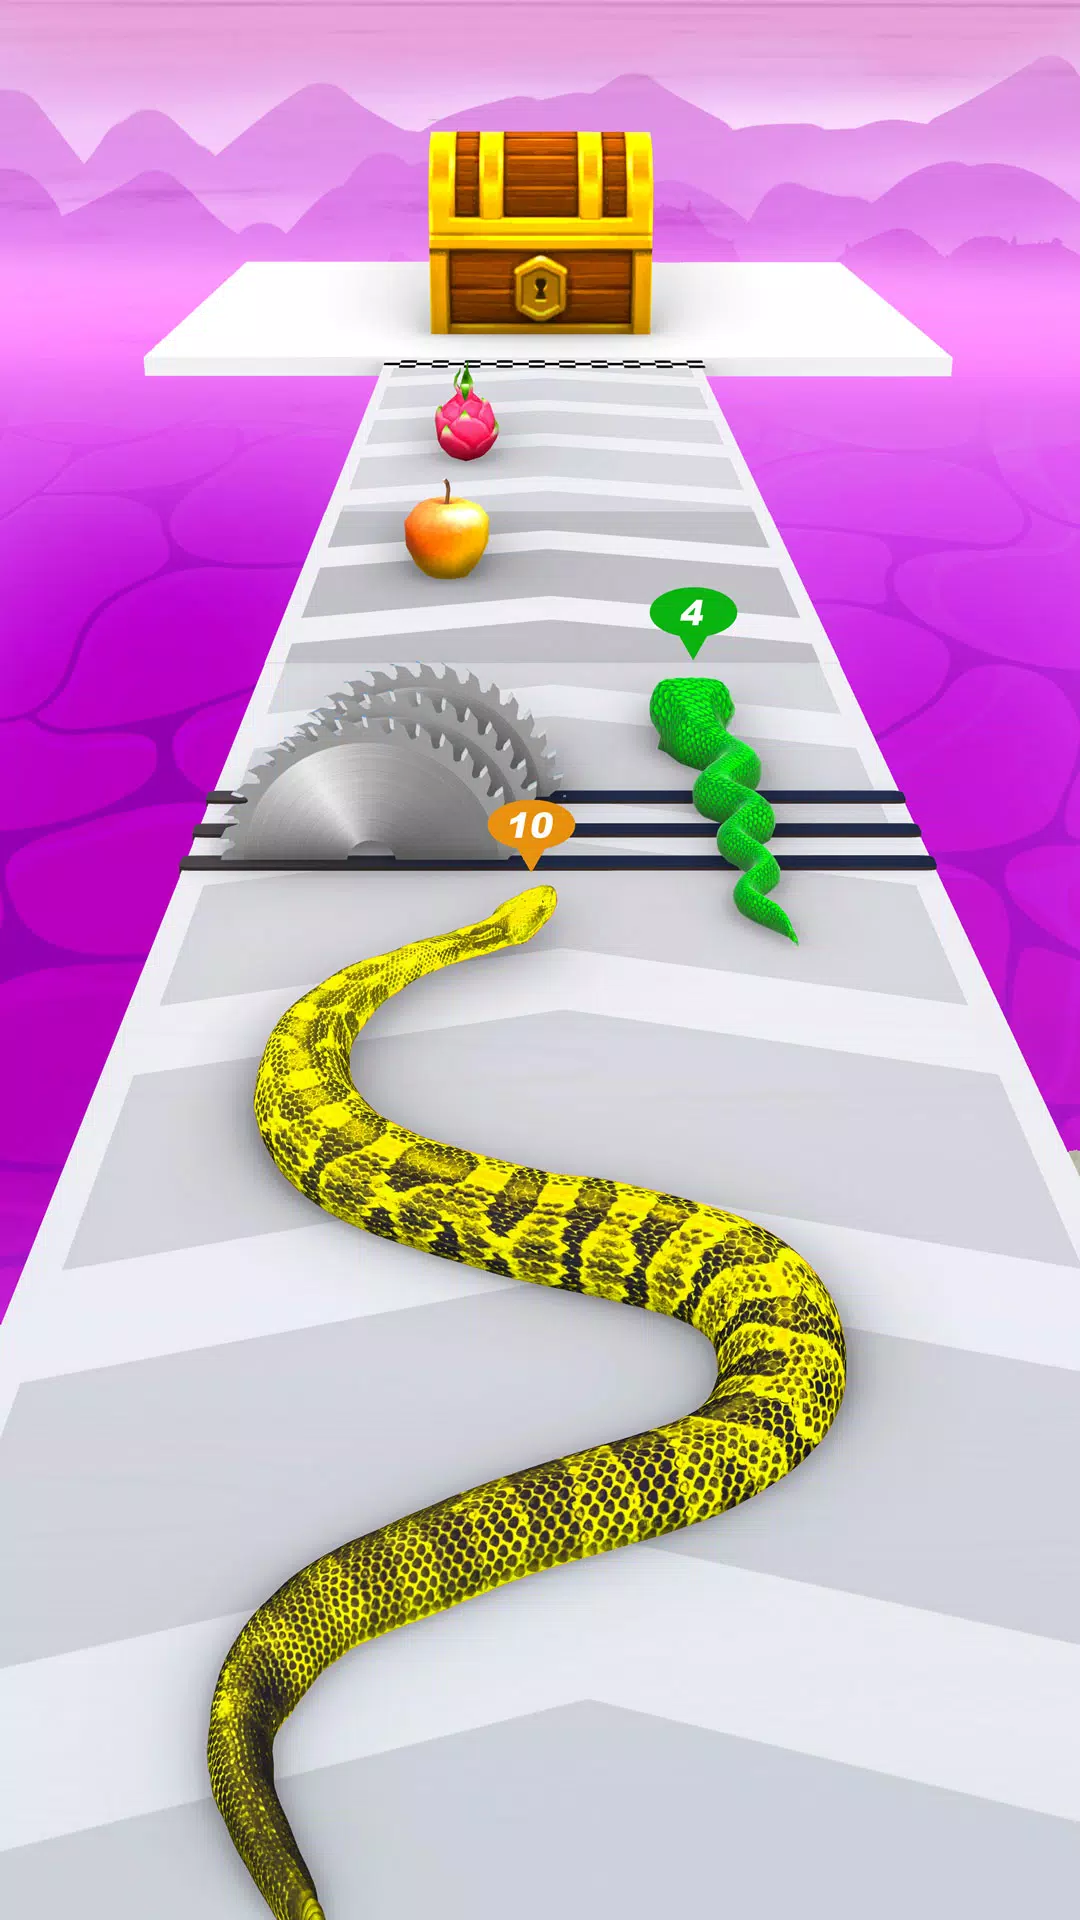 Download & Play Worm Race - Snake Game on PC & Mac (Emulator)